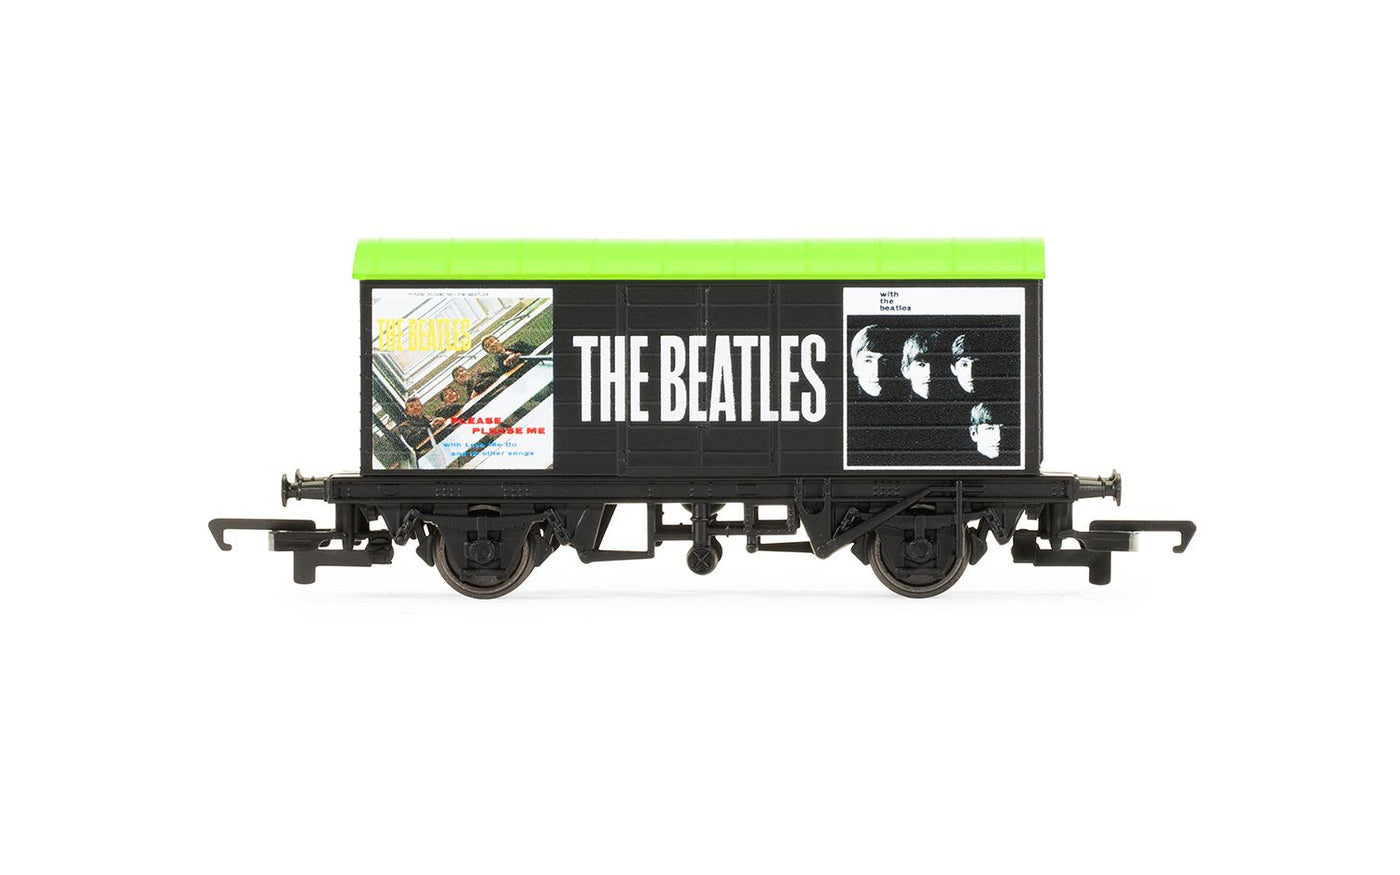 OO The Beatles, 'Please Please Me' & 'With The Beatles' 60th Anniversary Wagon